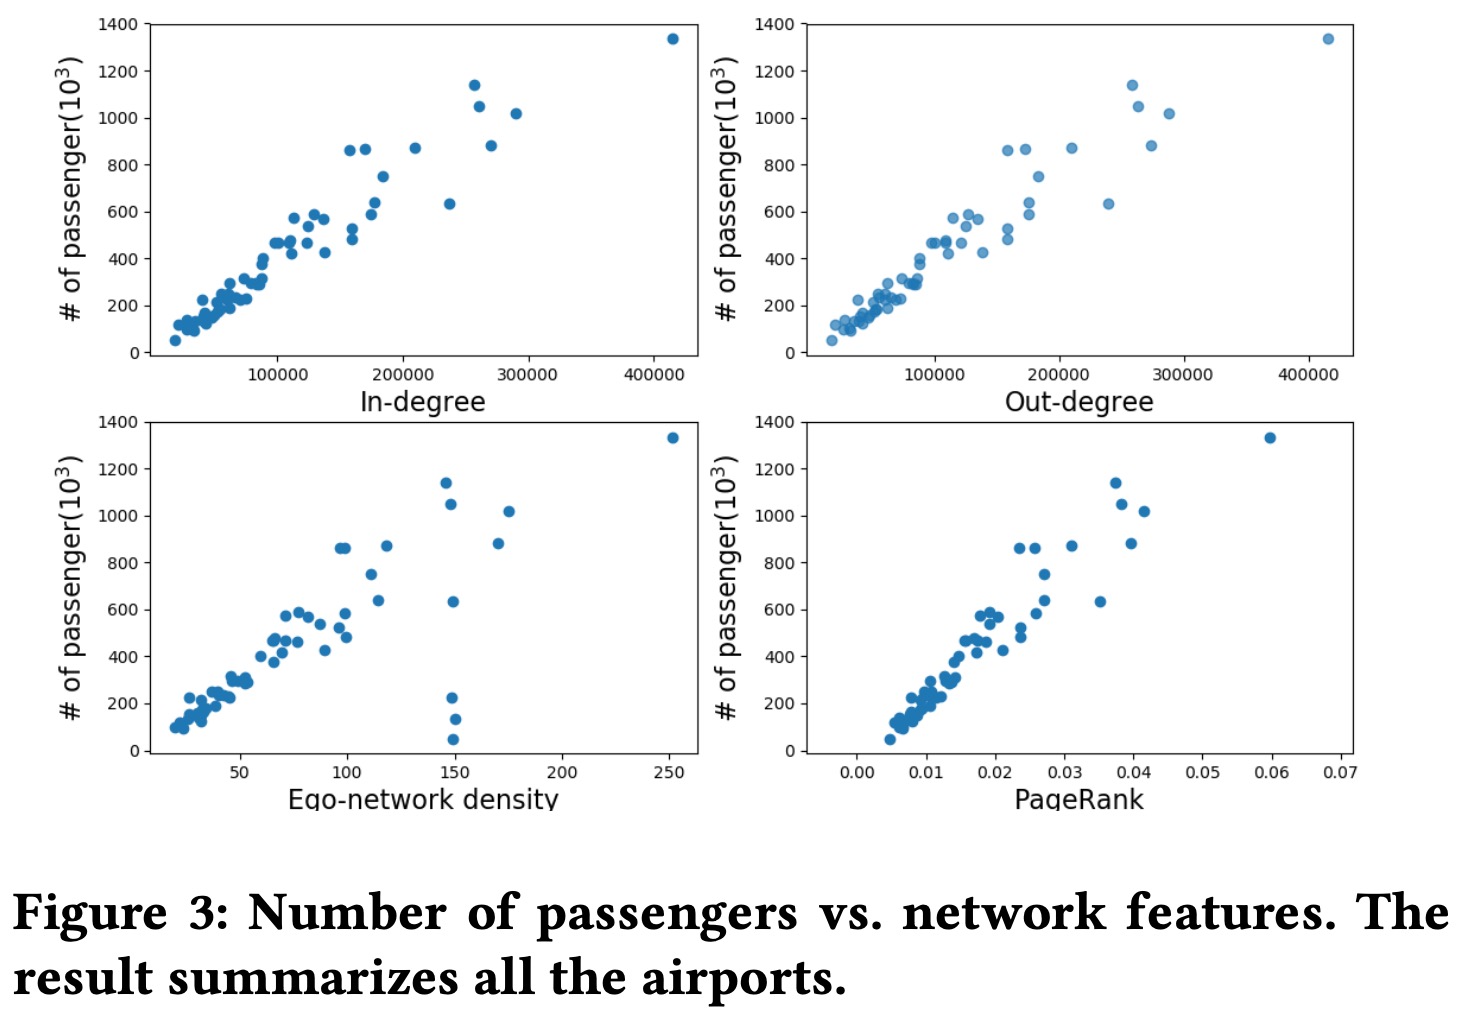 Number of passengers vs. network features